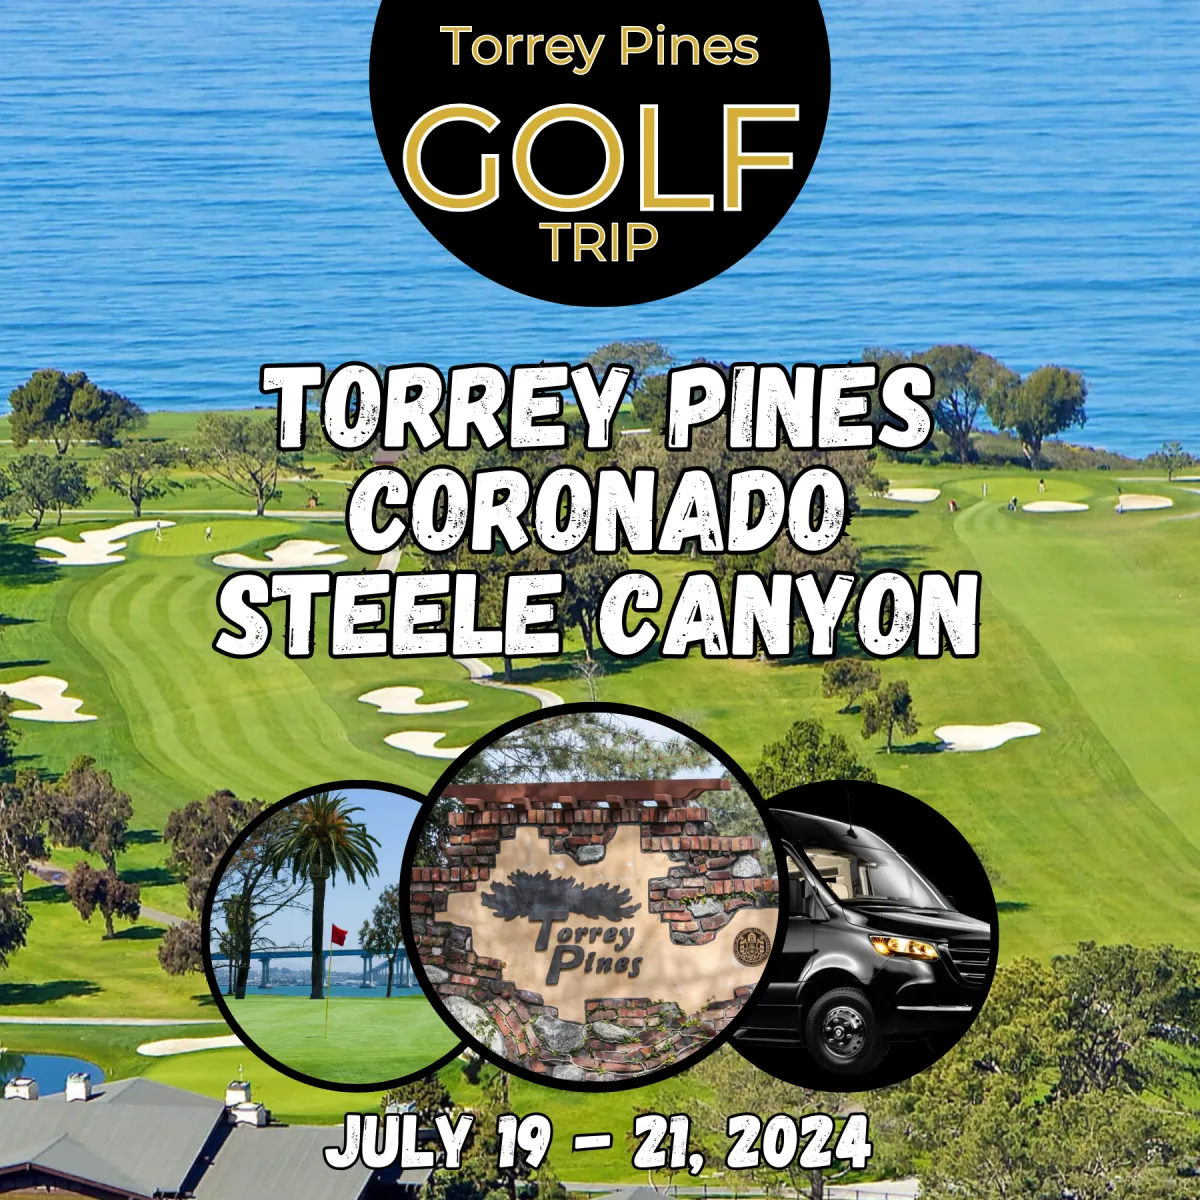 quick golf trip from scottsdale to San Diego to play Torrey Pines south golf course